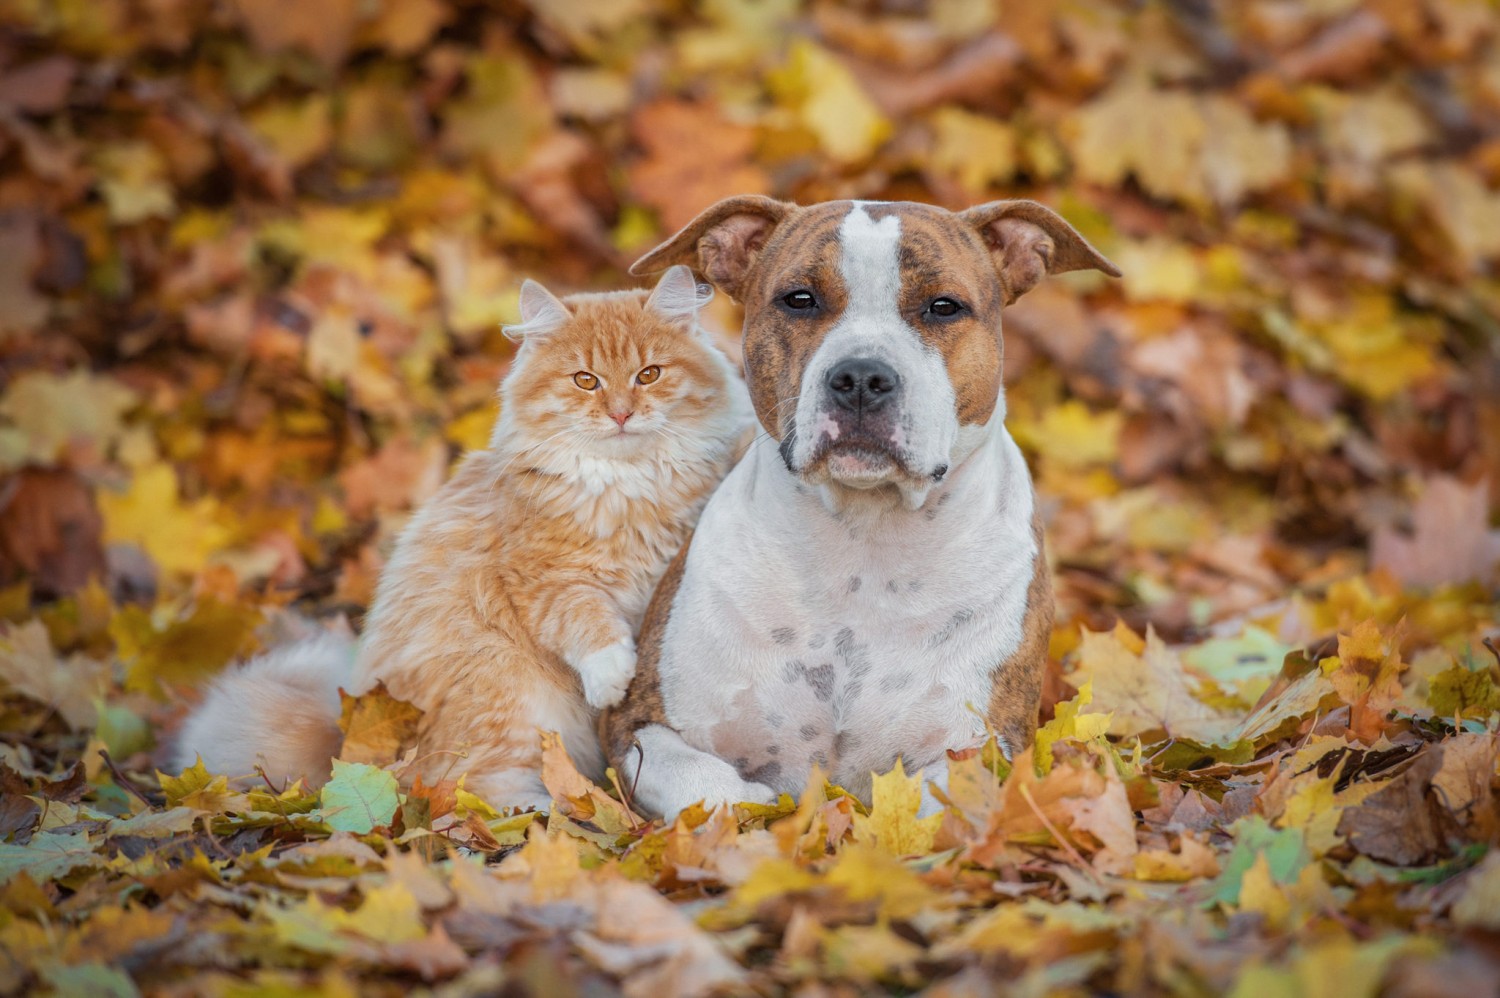 Cat and Dog in leaves